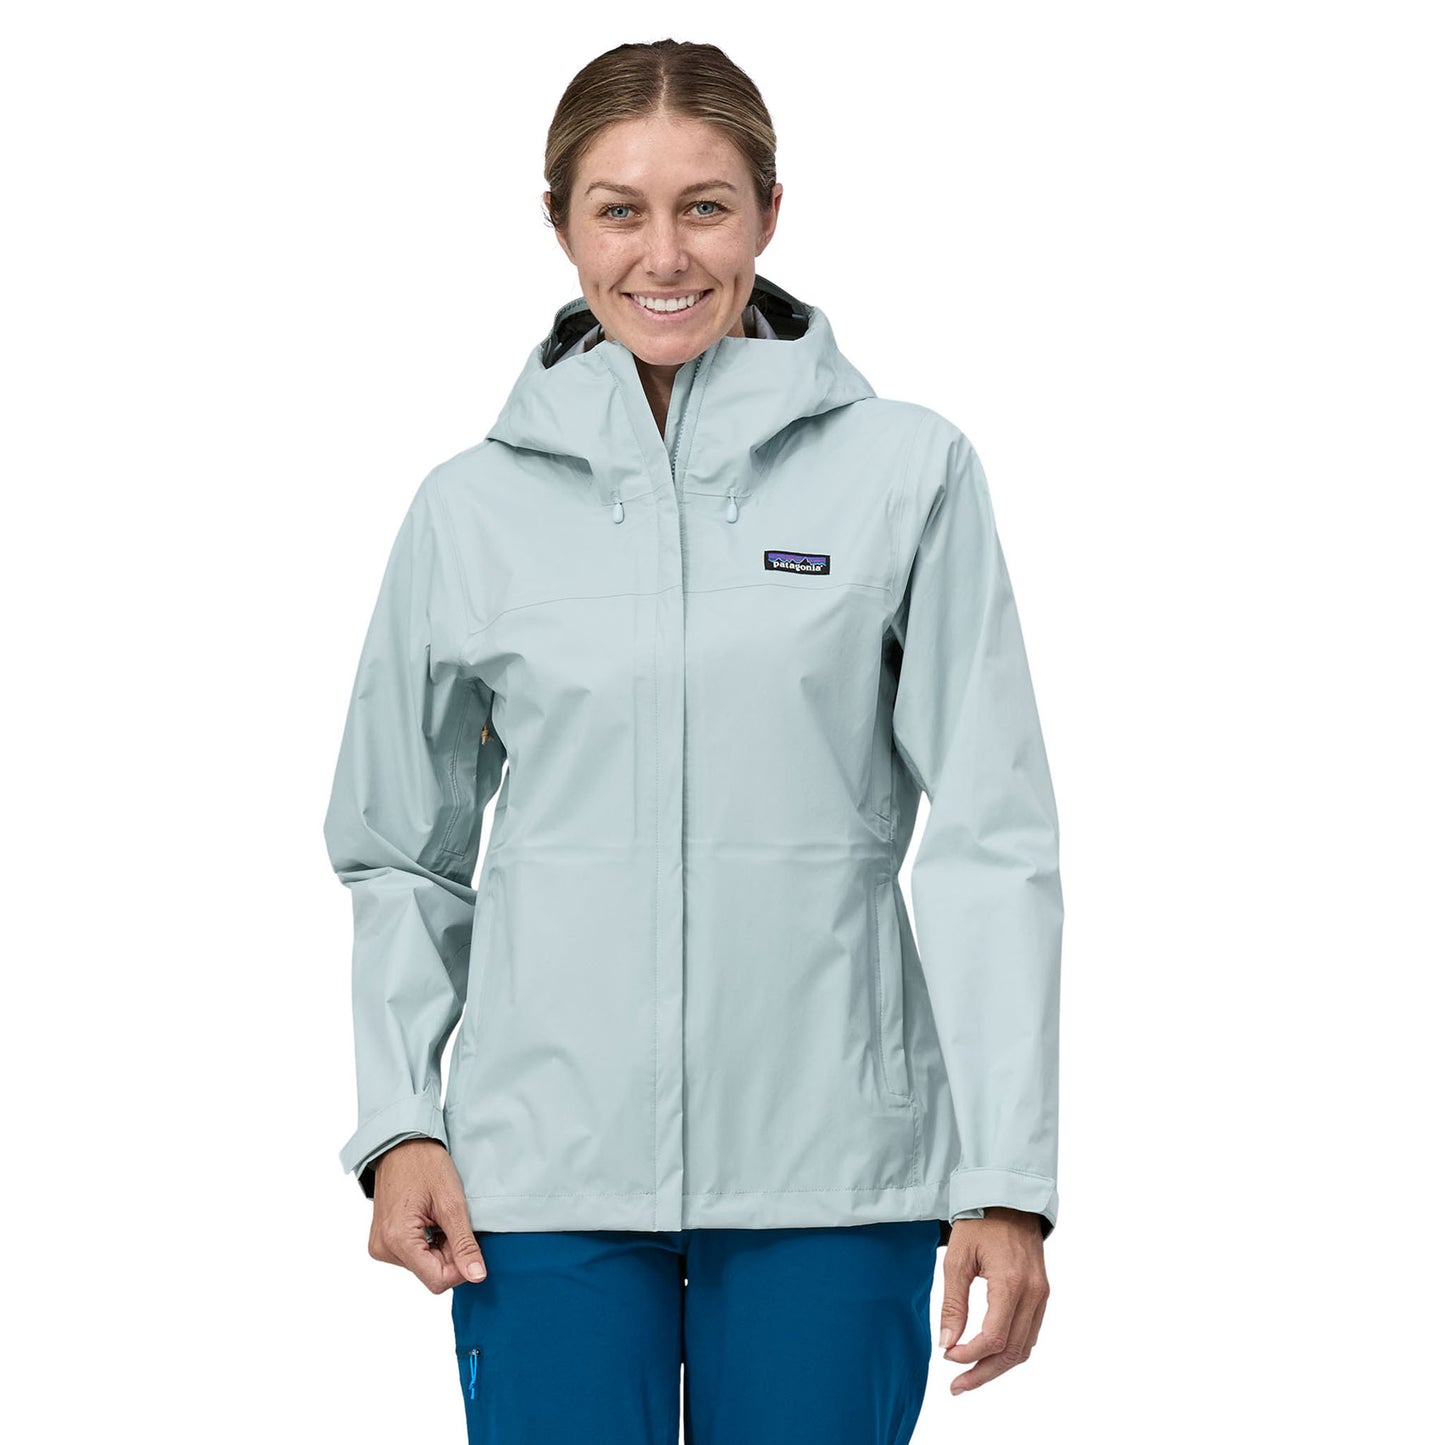 Women's Patagonia 3L Jacket in chilled blue